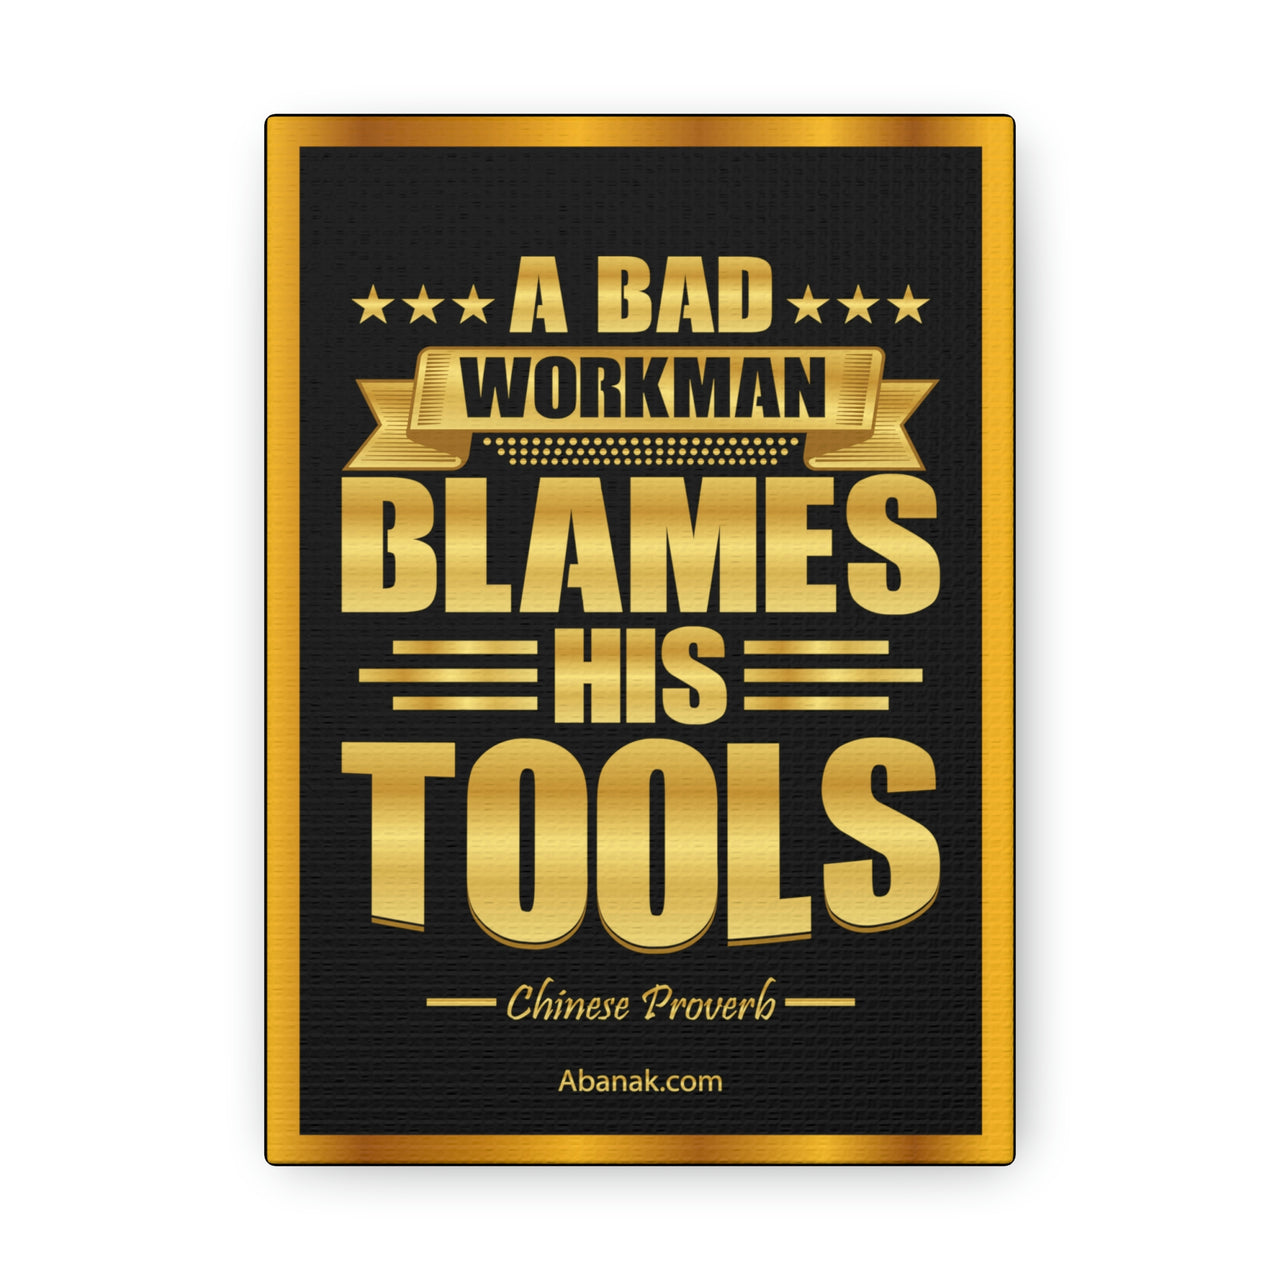 A Bad Workman Blames His Tools Canvas Print - Motivational Gallery Wrapped Canvas Wall Art | Abanak